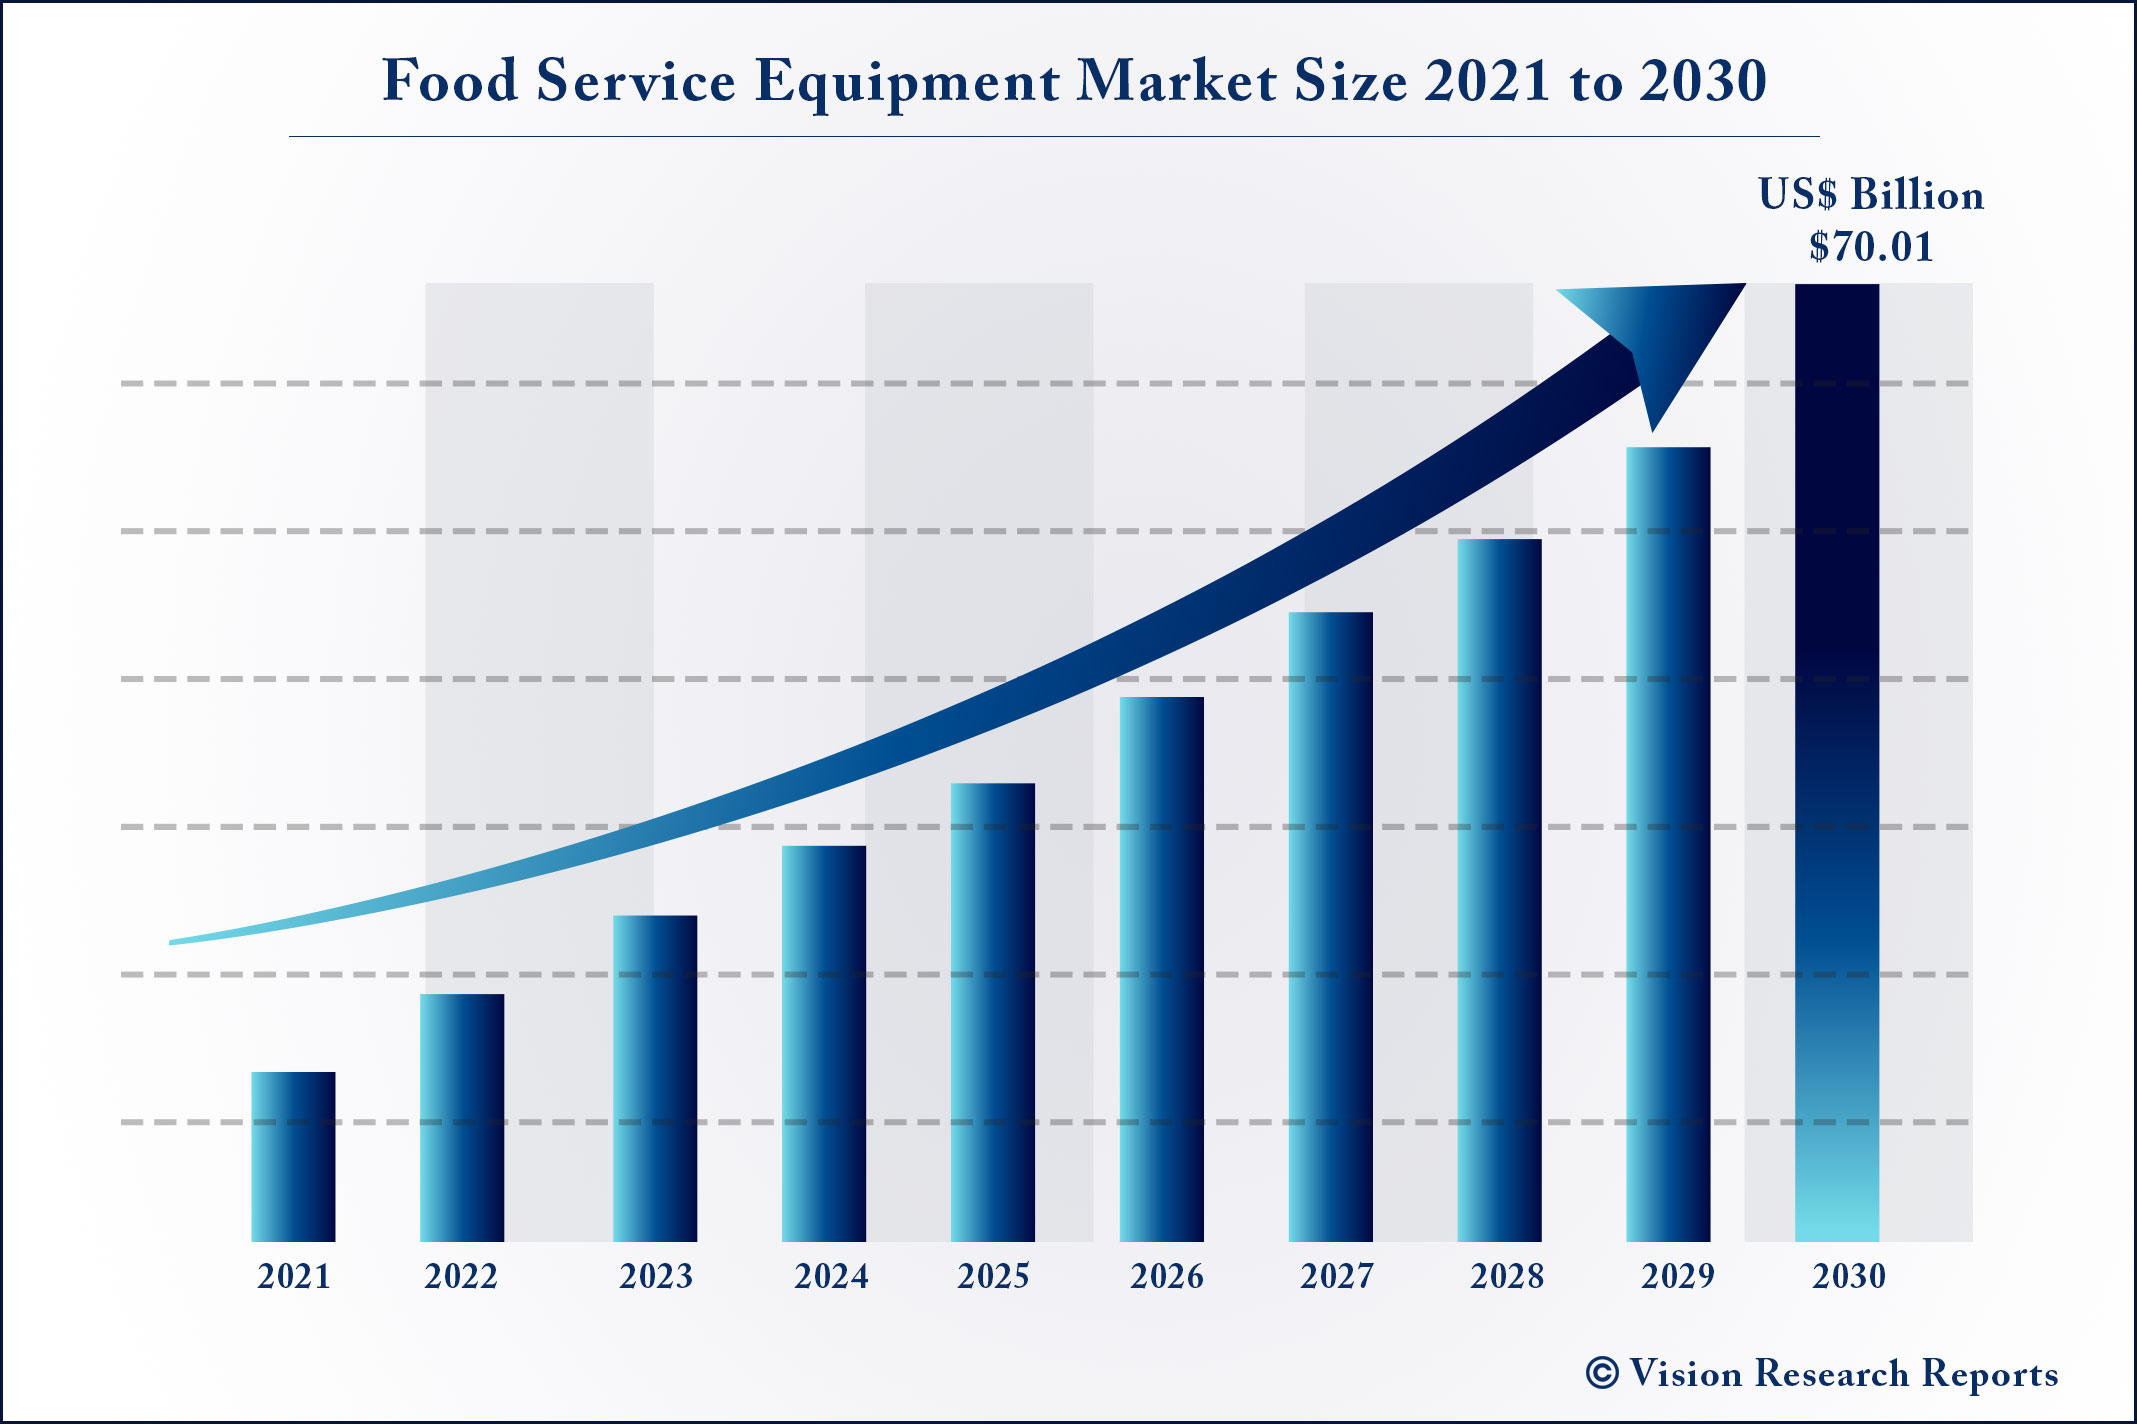 Food Service Equipment Market Size 2021 to 2030